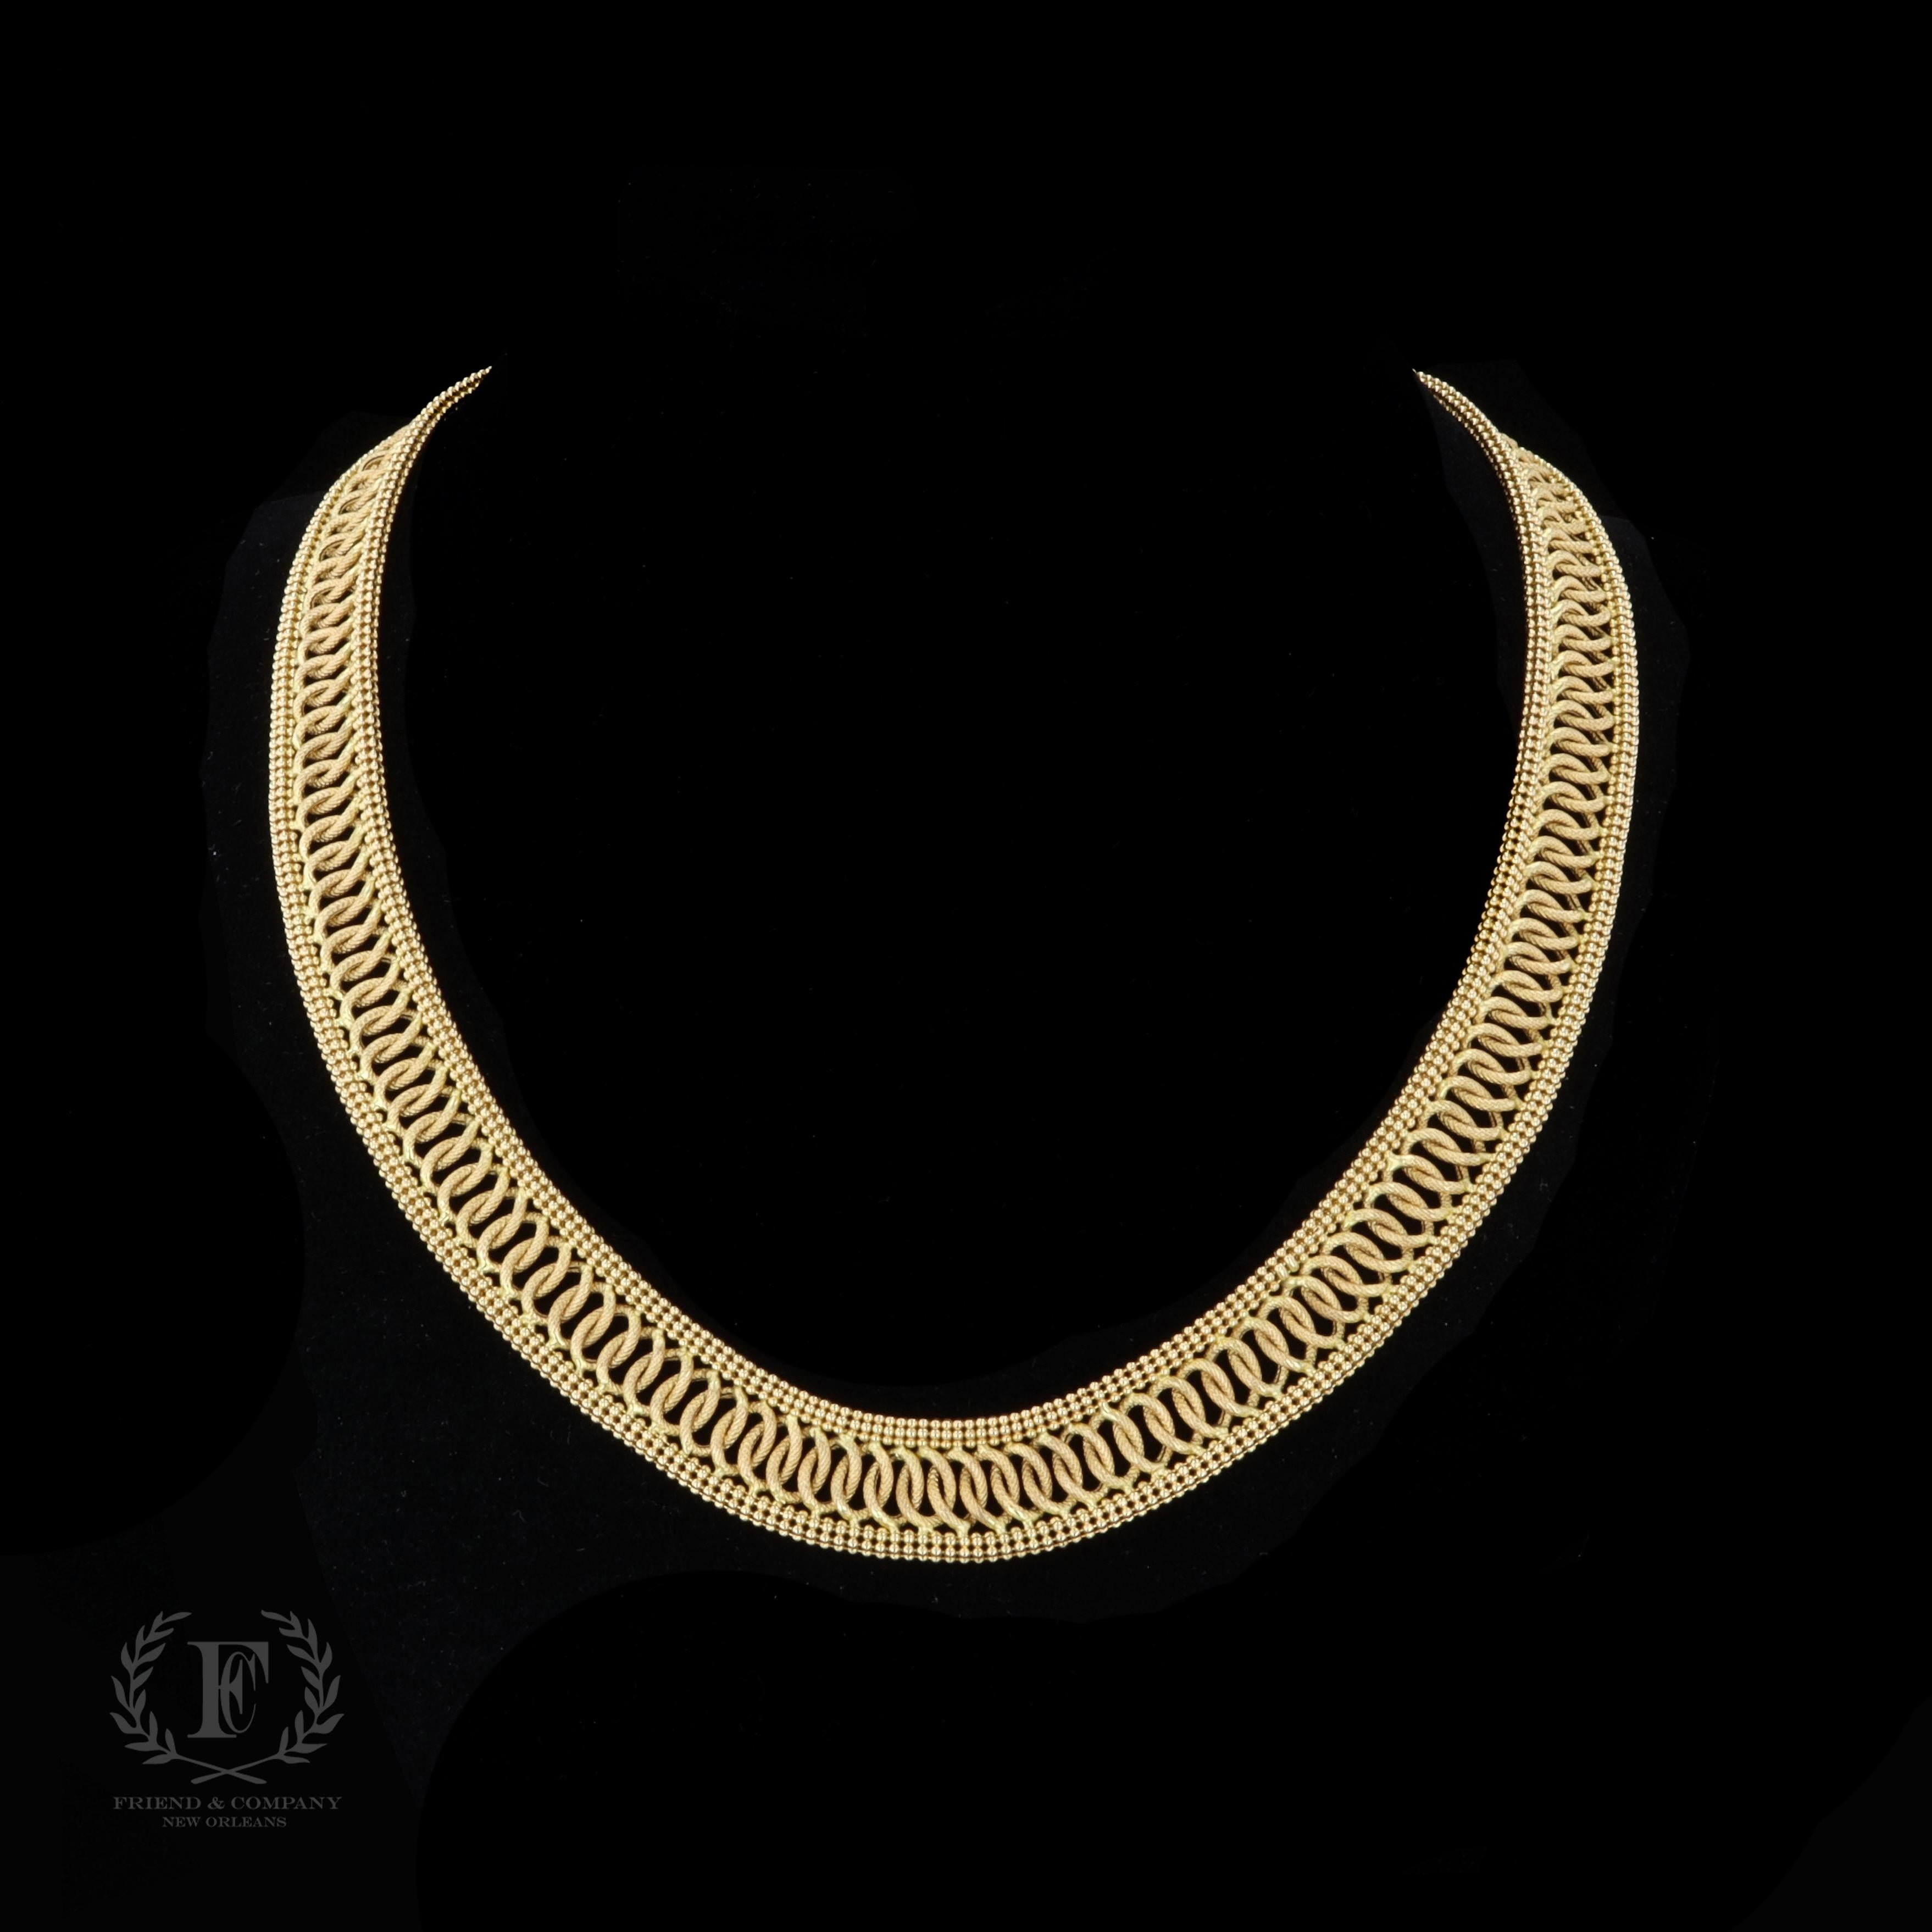 Beautiful woven layers of 14 karat yellow gold to create this spectacular necklace. It features a 14k yellow gold clasp as well as four cabochon cut blue sapphires. The necklace measures 17 inches in length.